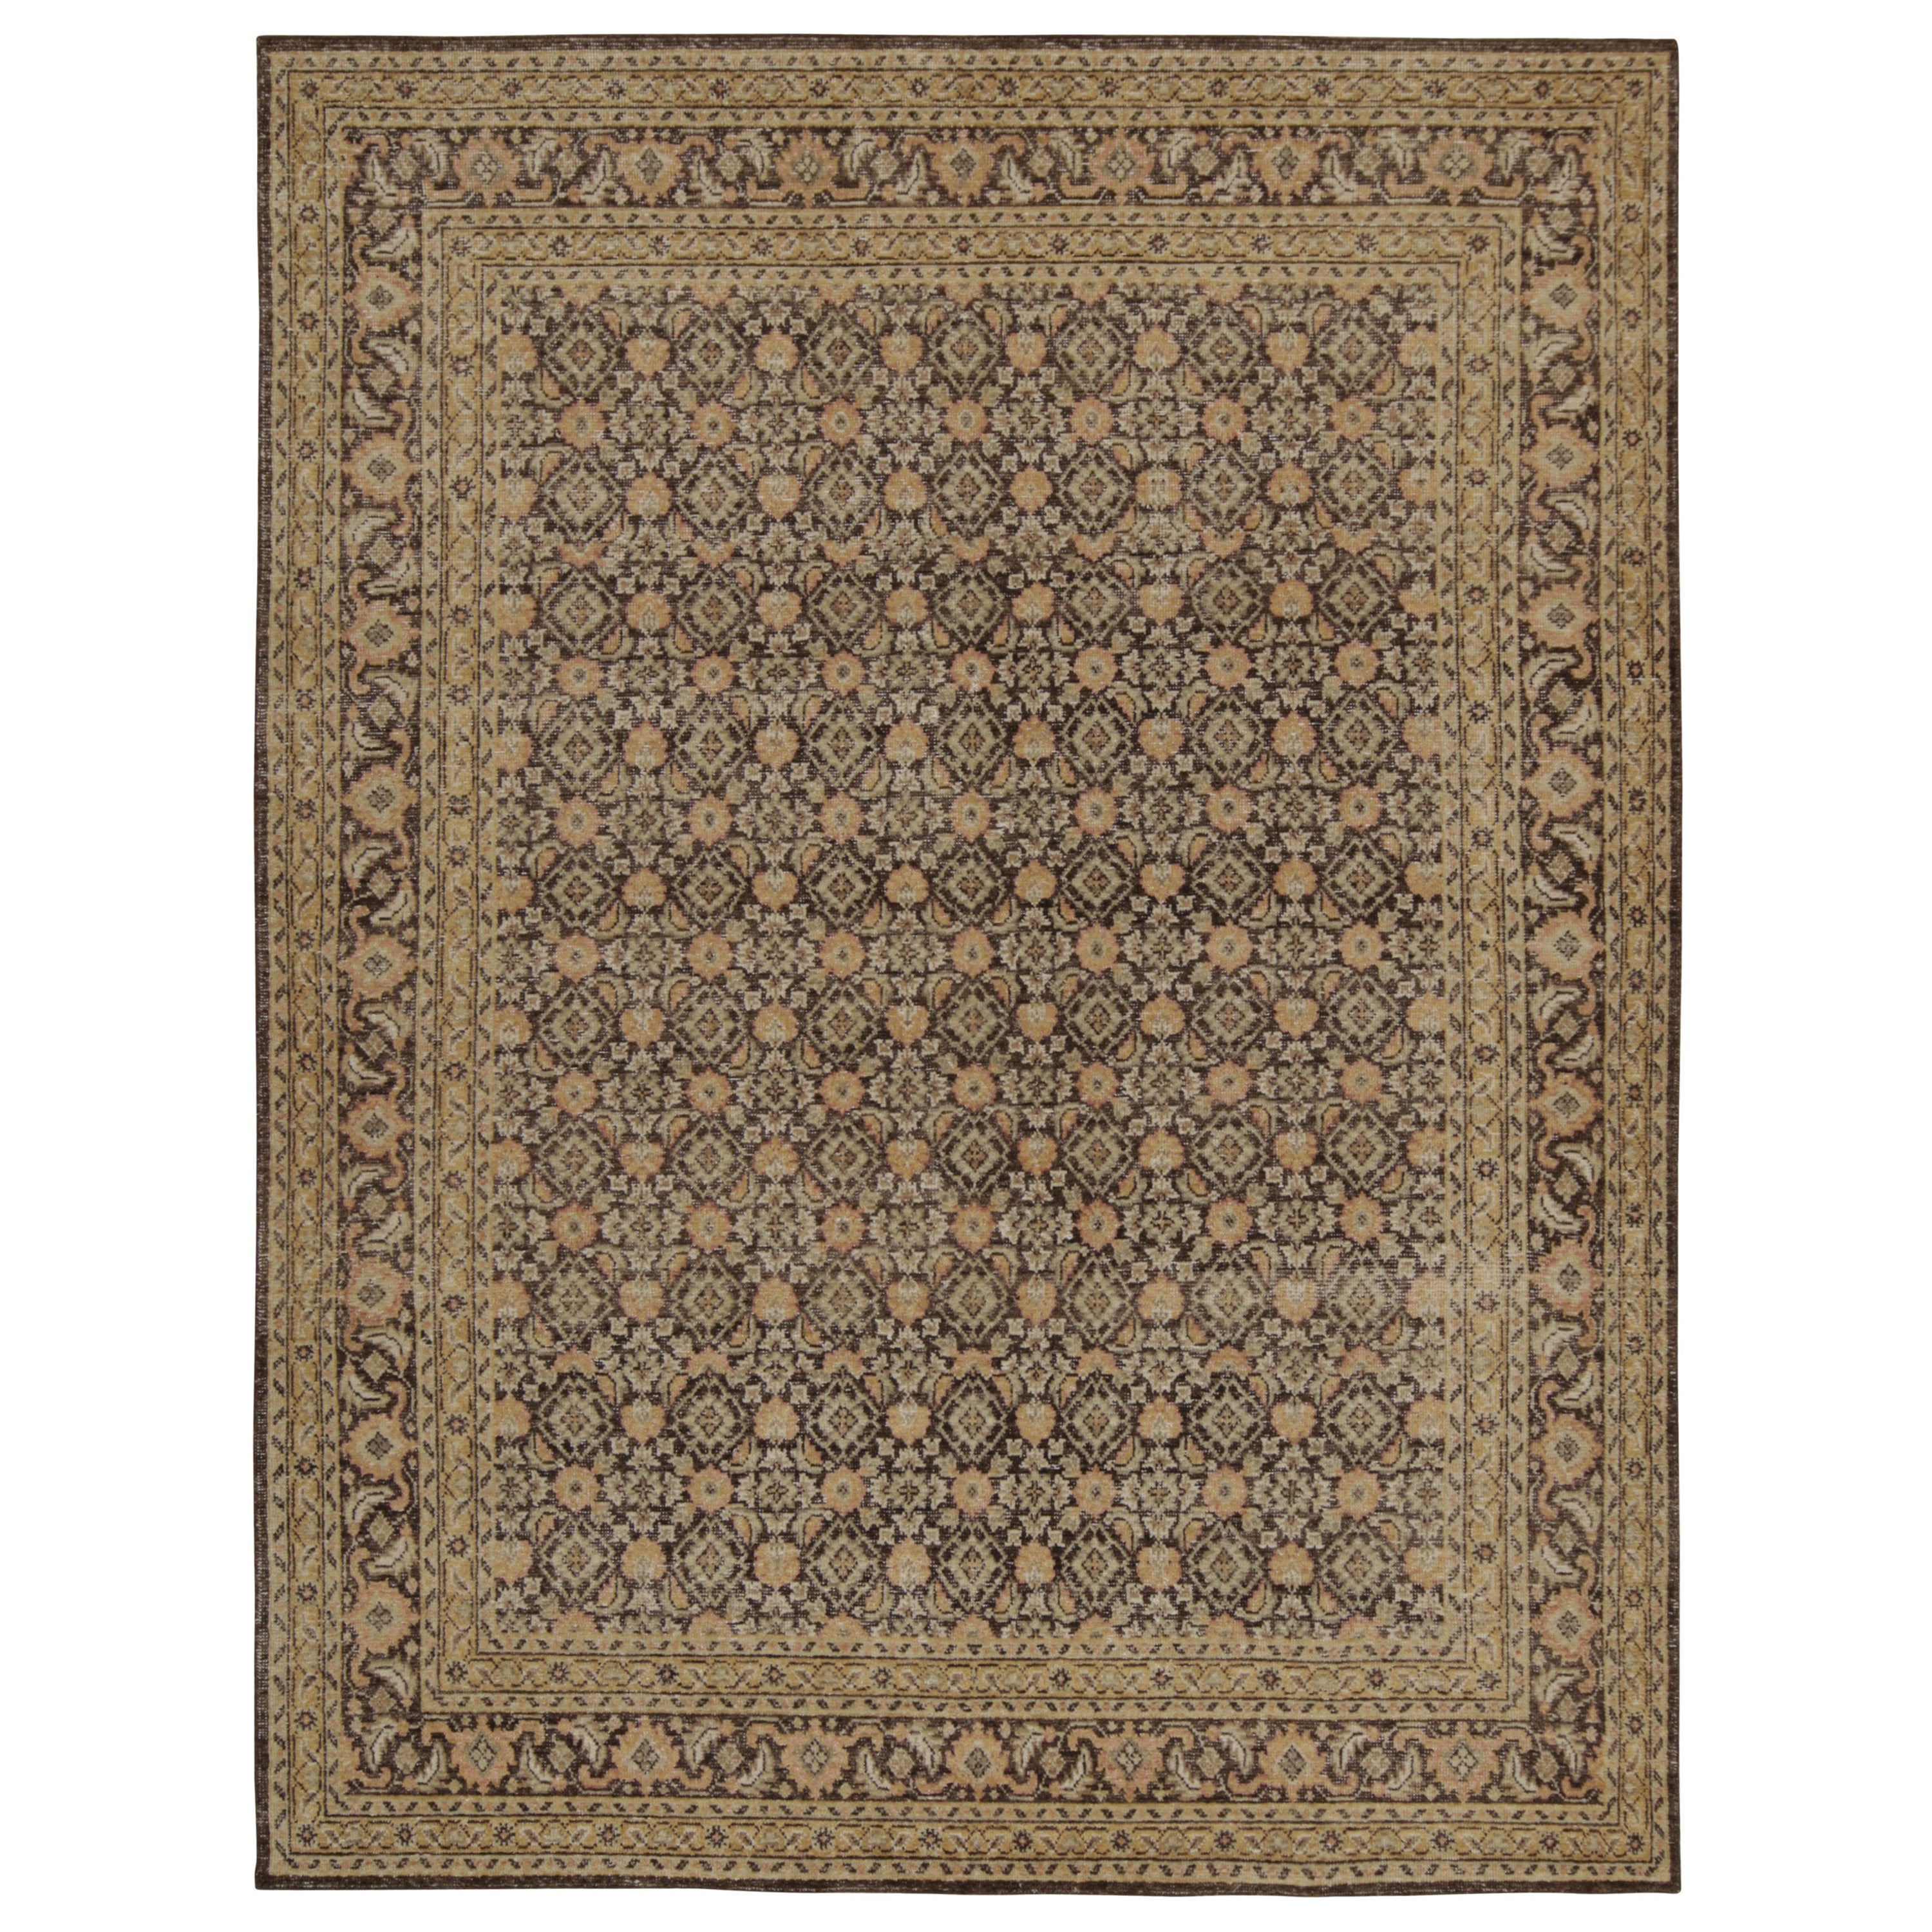 Rug & Kilim’s Distressed Persian Style Rug in Brown and Gold Floral Patterns